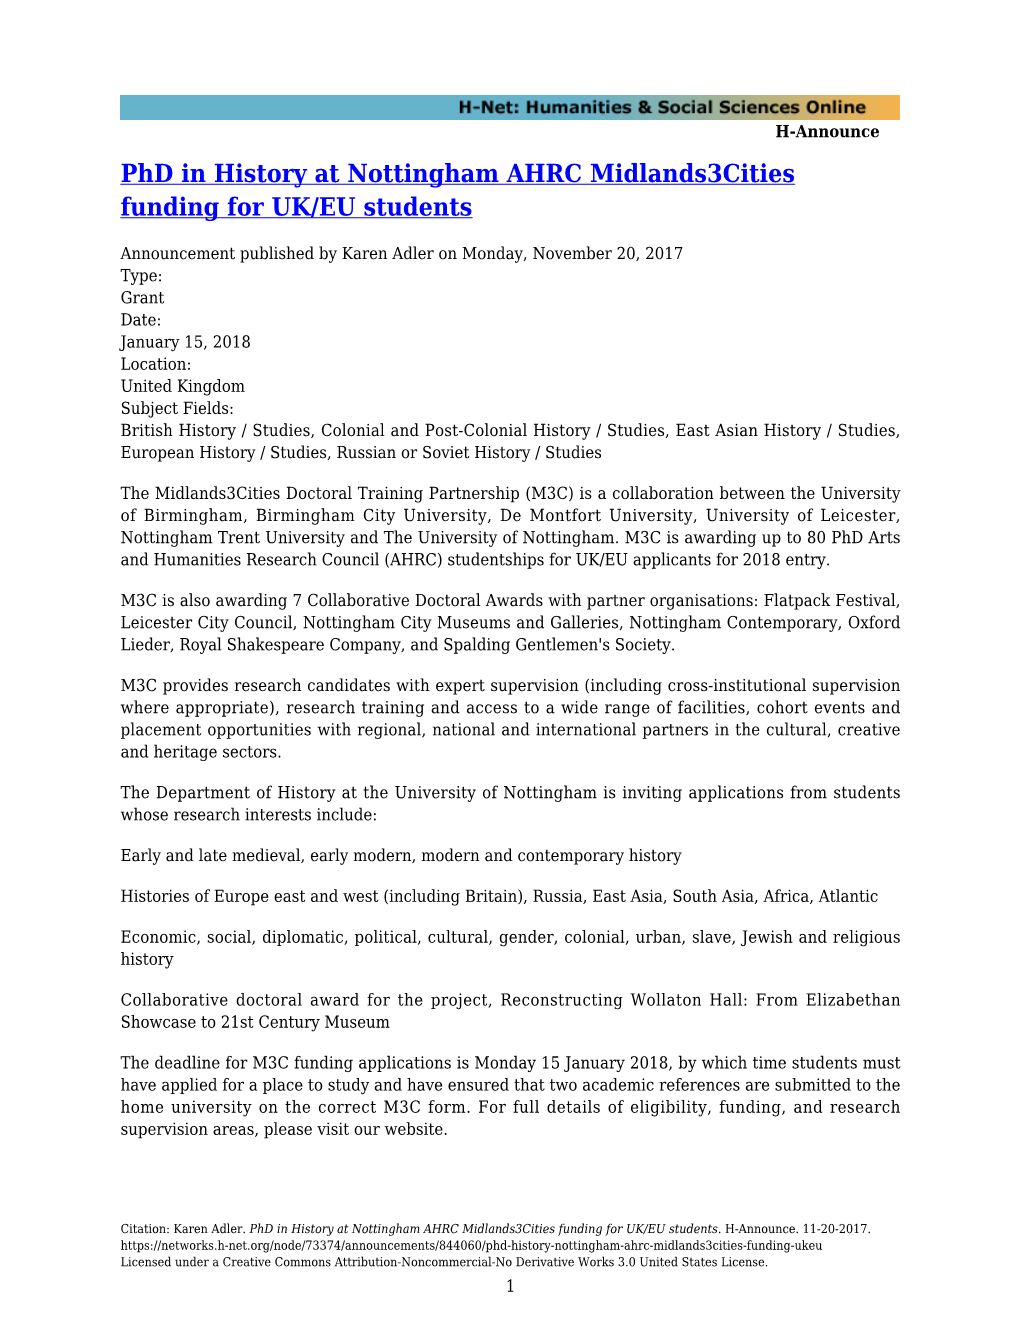 Phd in History at Nottingham AHRC Midlands3cities Funding for UK/EU Students